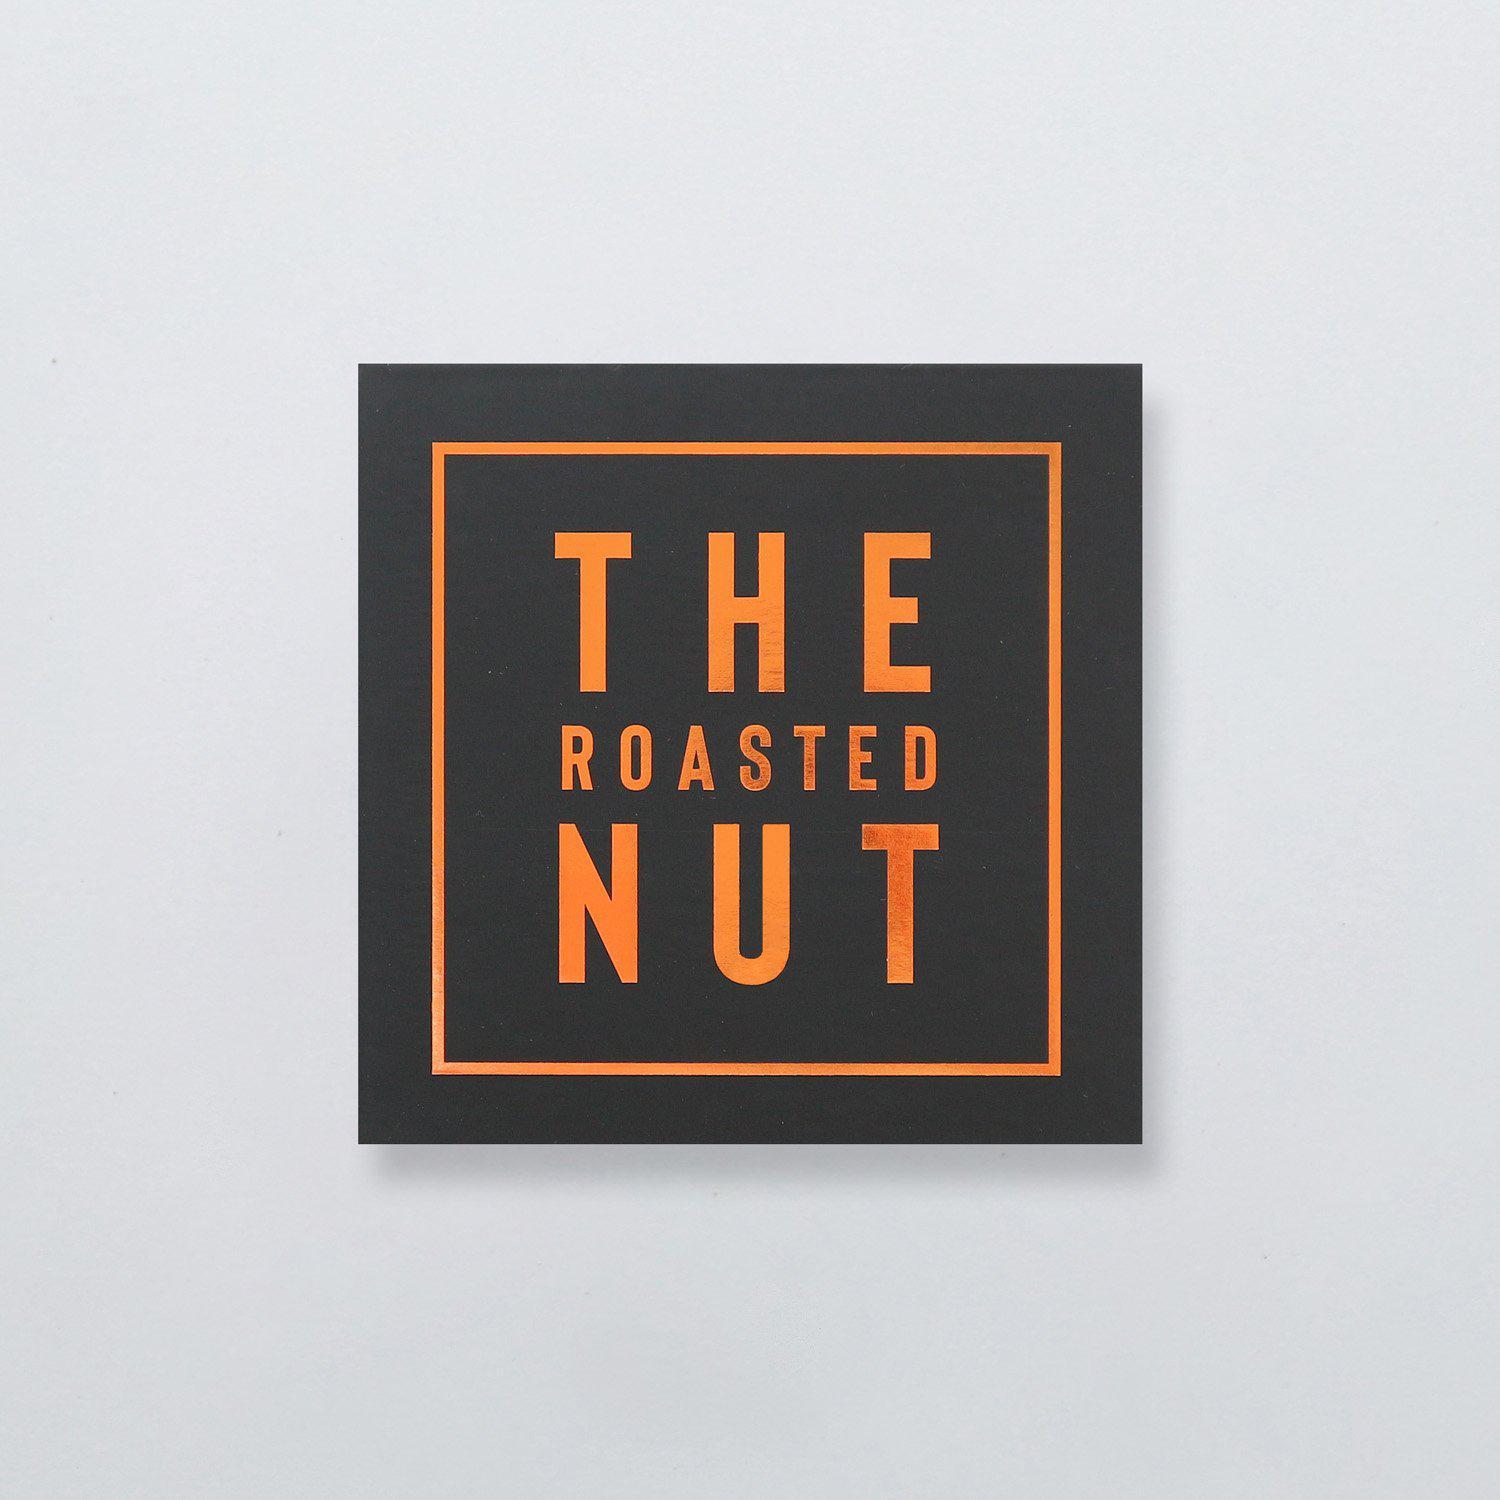 THE BLACK BOX - SMALL-Gift Box-The Roasted Nut Inc.